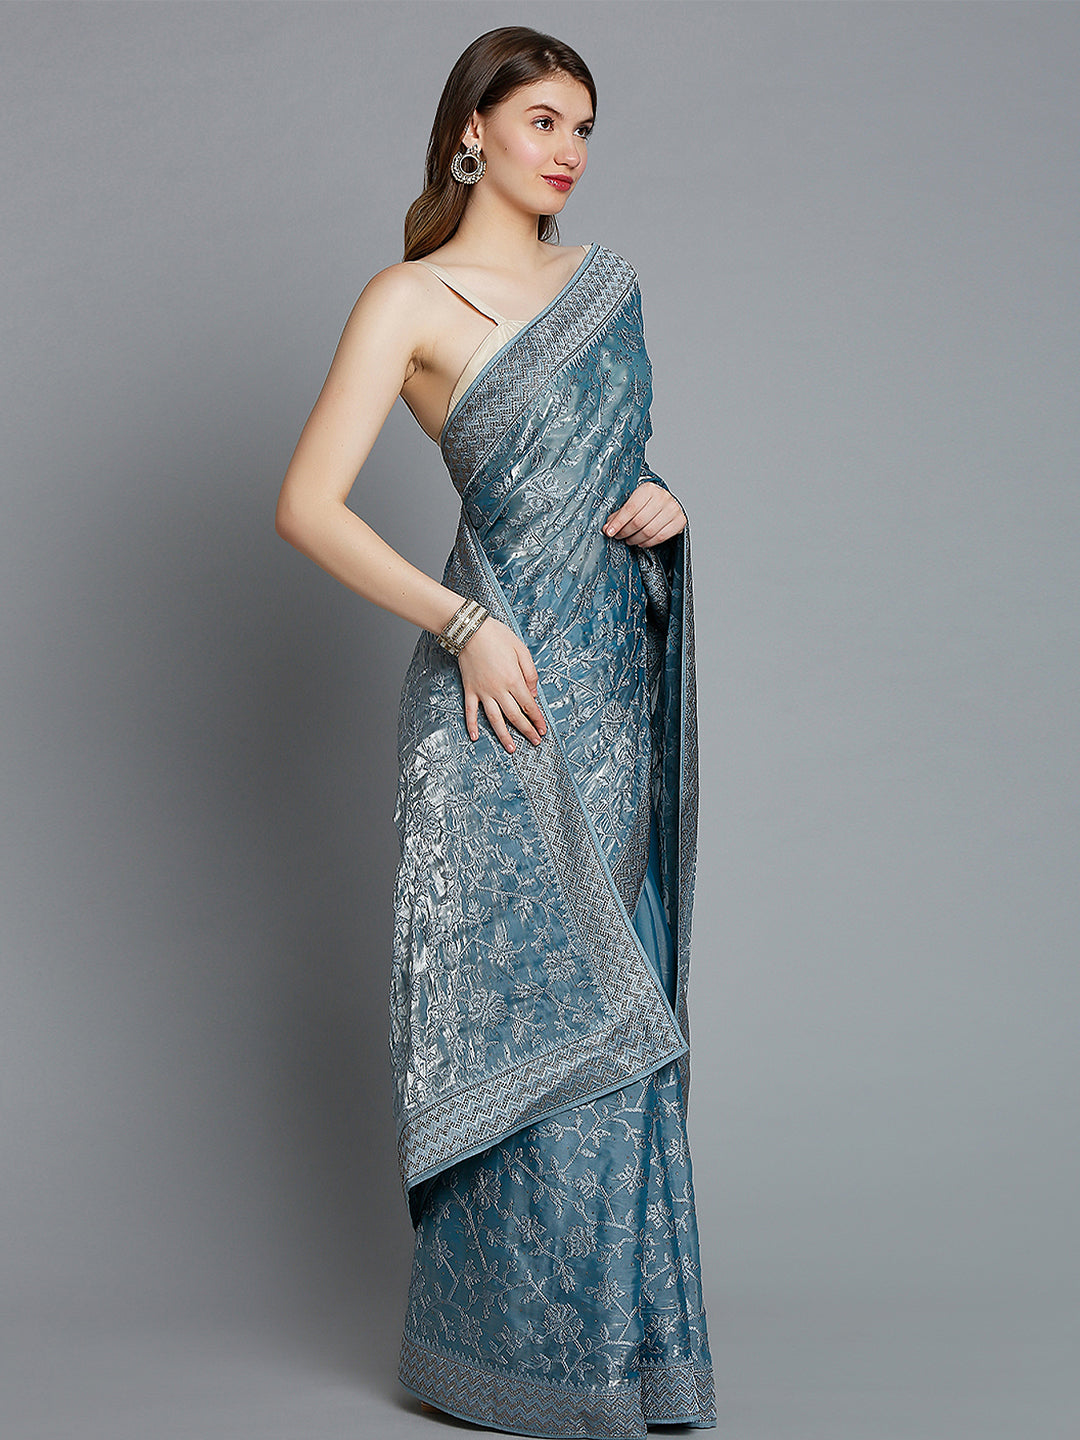 Steel Blue Soft Tissue Saree With Floral Embroidery